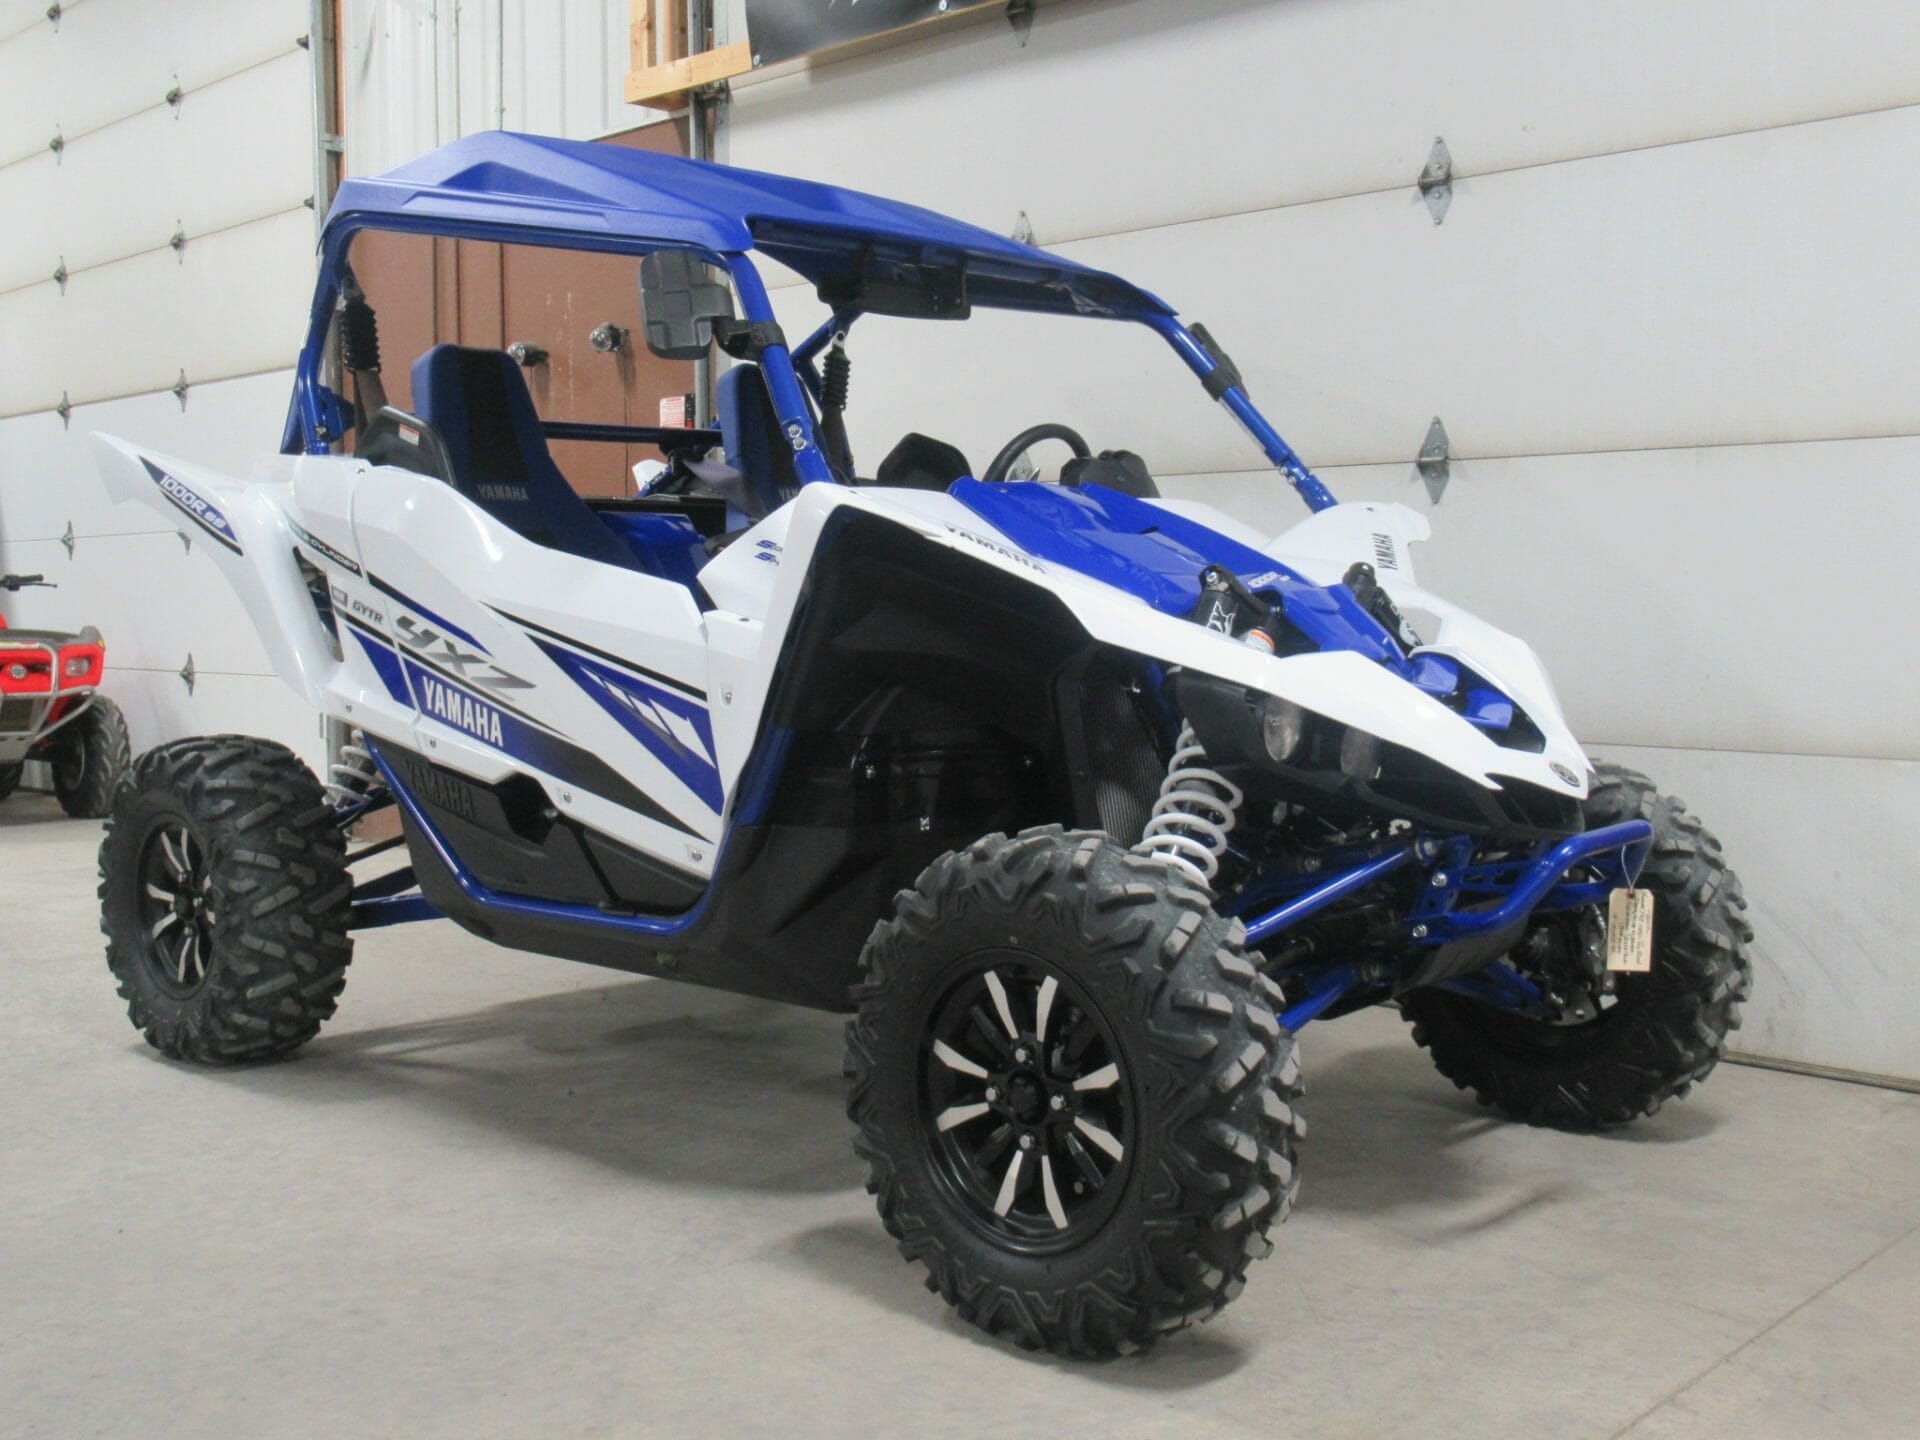 Why Purchase Pre-Owned Powersports Equipment?